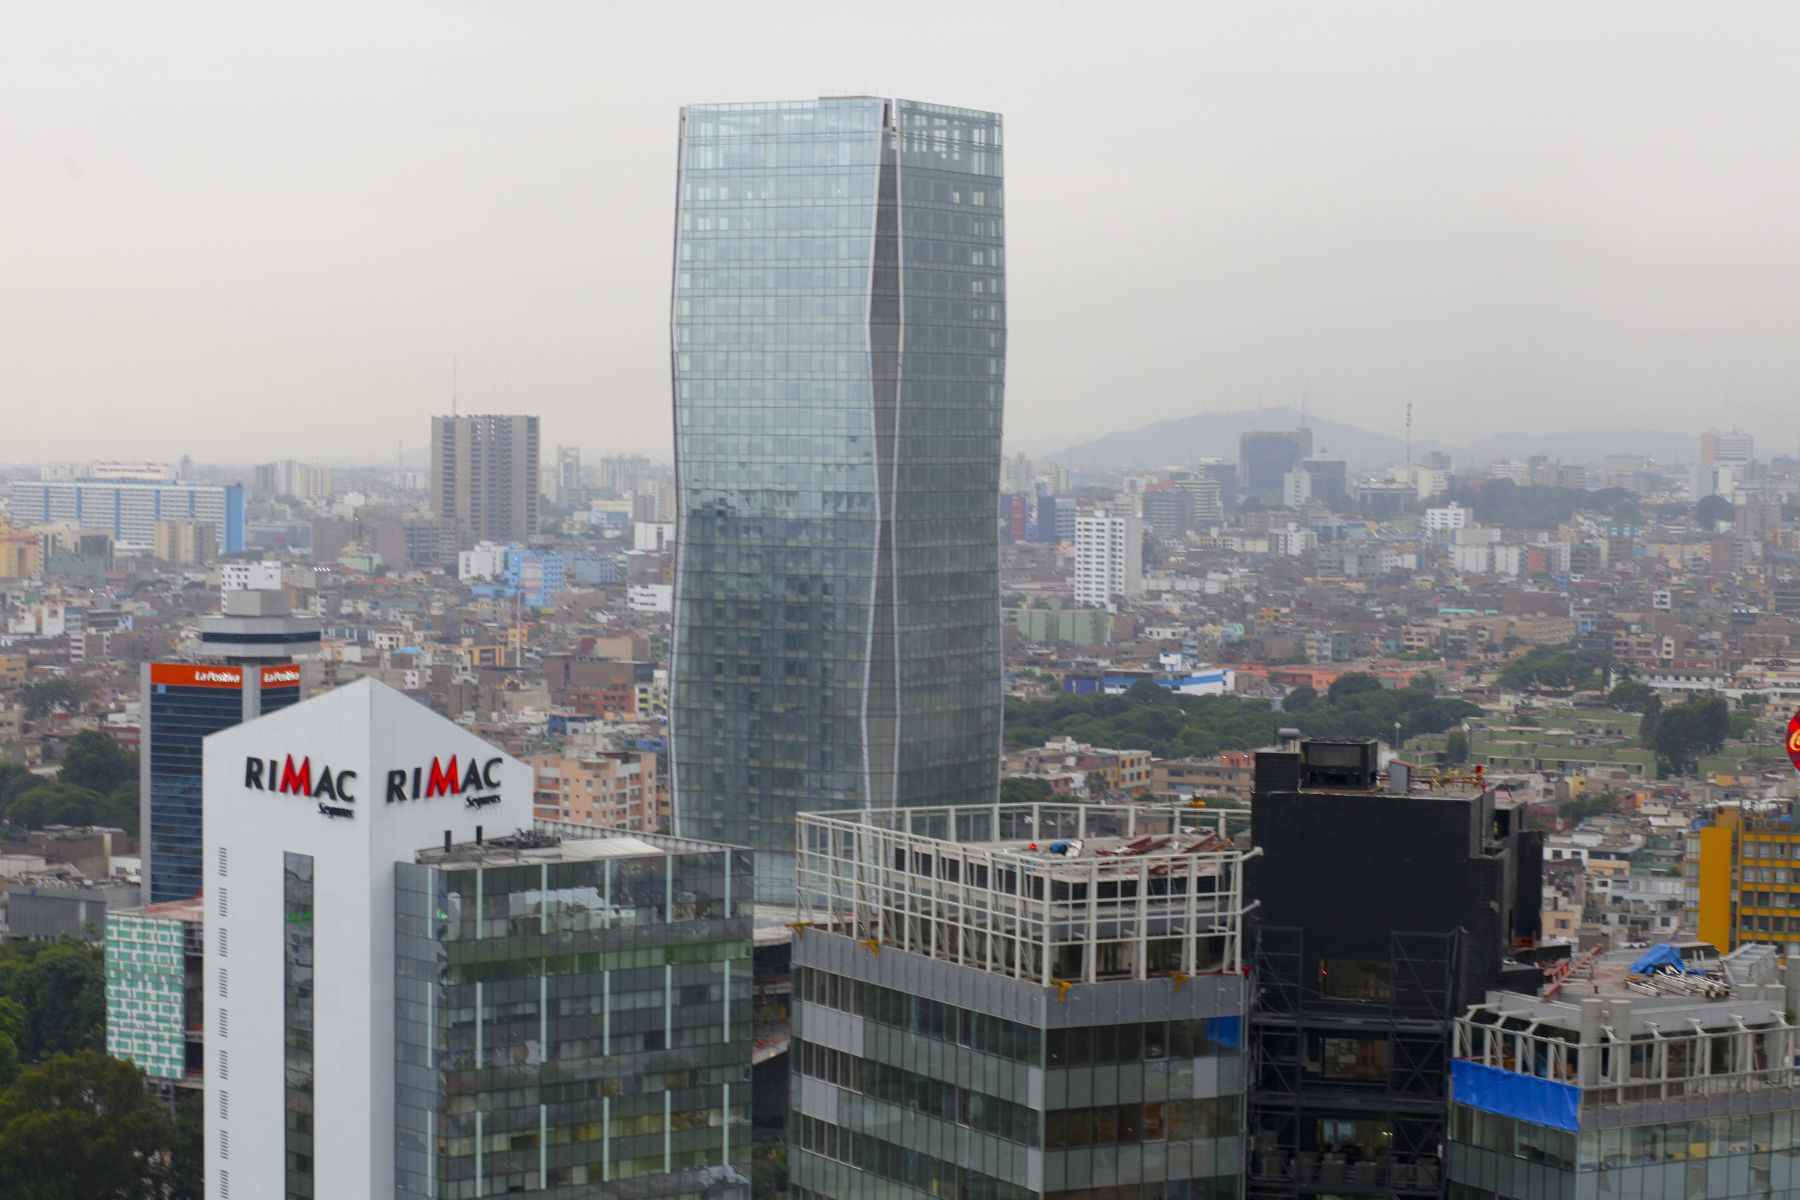 The financial hub and business centre of the nation